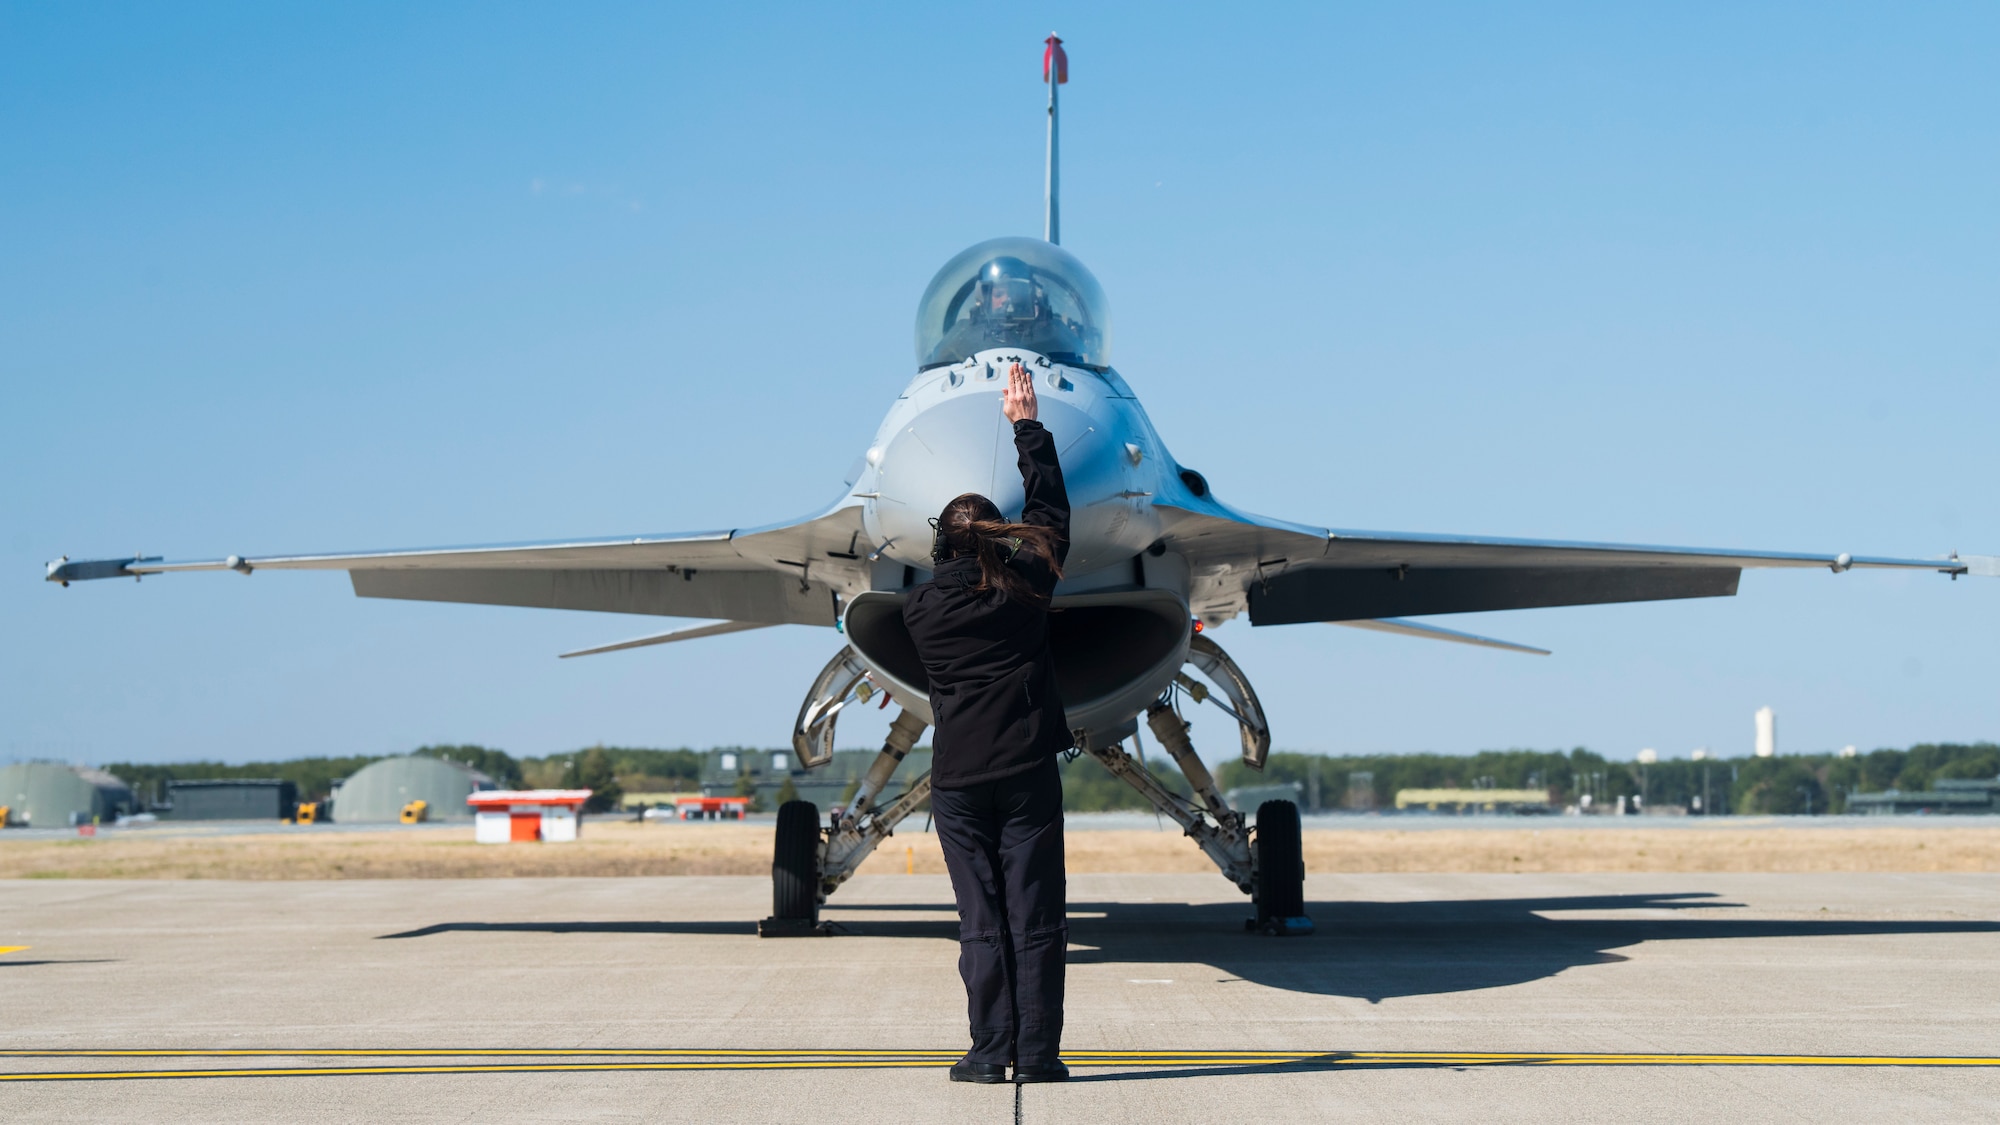 Air Force member giving hand signals in front of F-16.